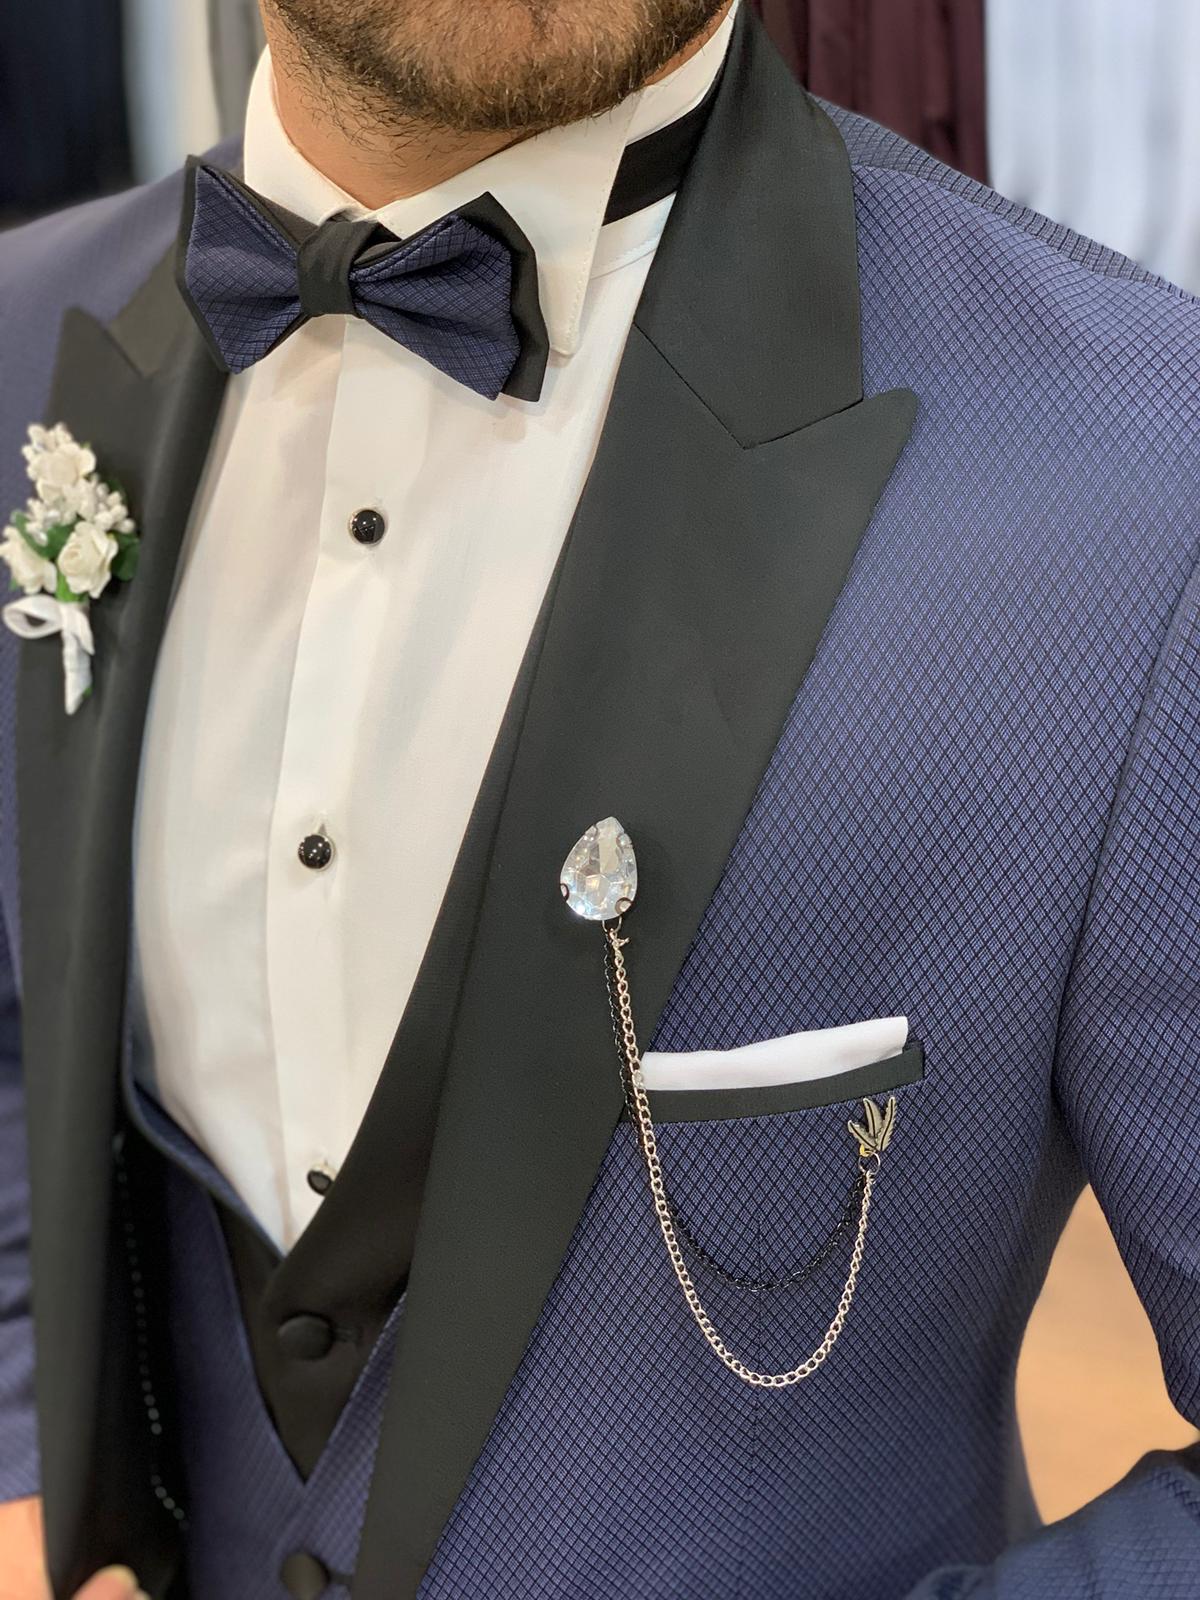 How to Dress For College Formal Events by GentWith Blog